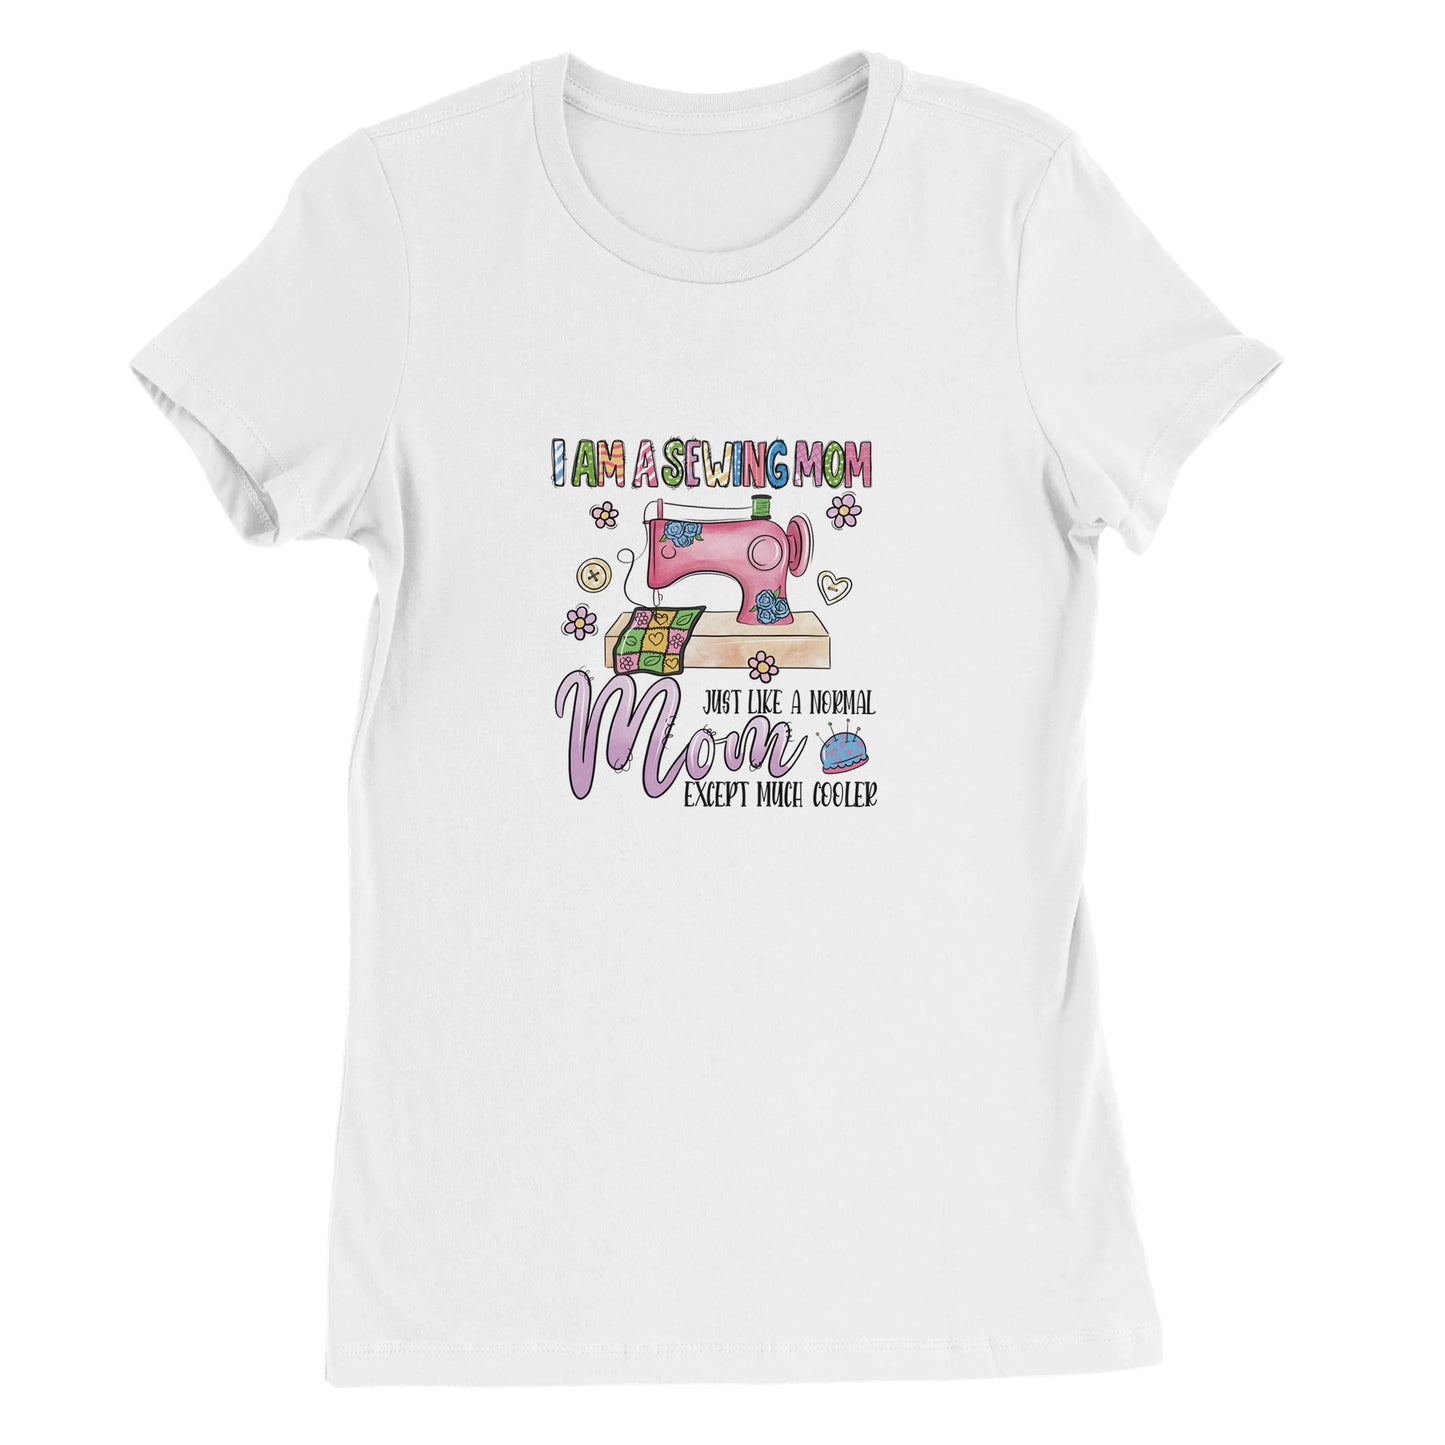 Sewing Mom Like a Normal Mom but Cooler - Premium Women's Crewneck T-shirt